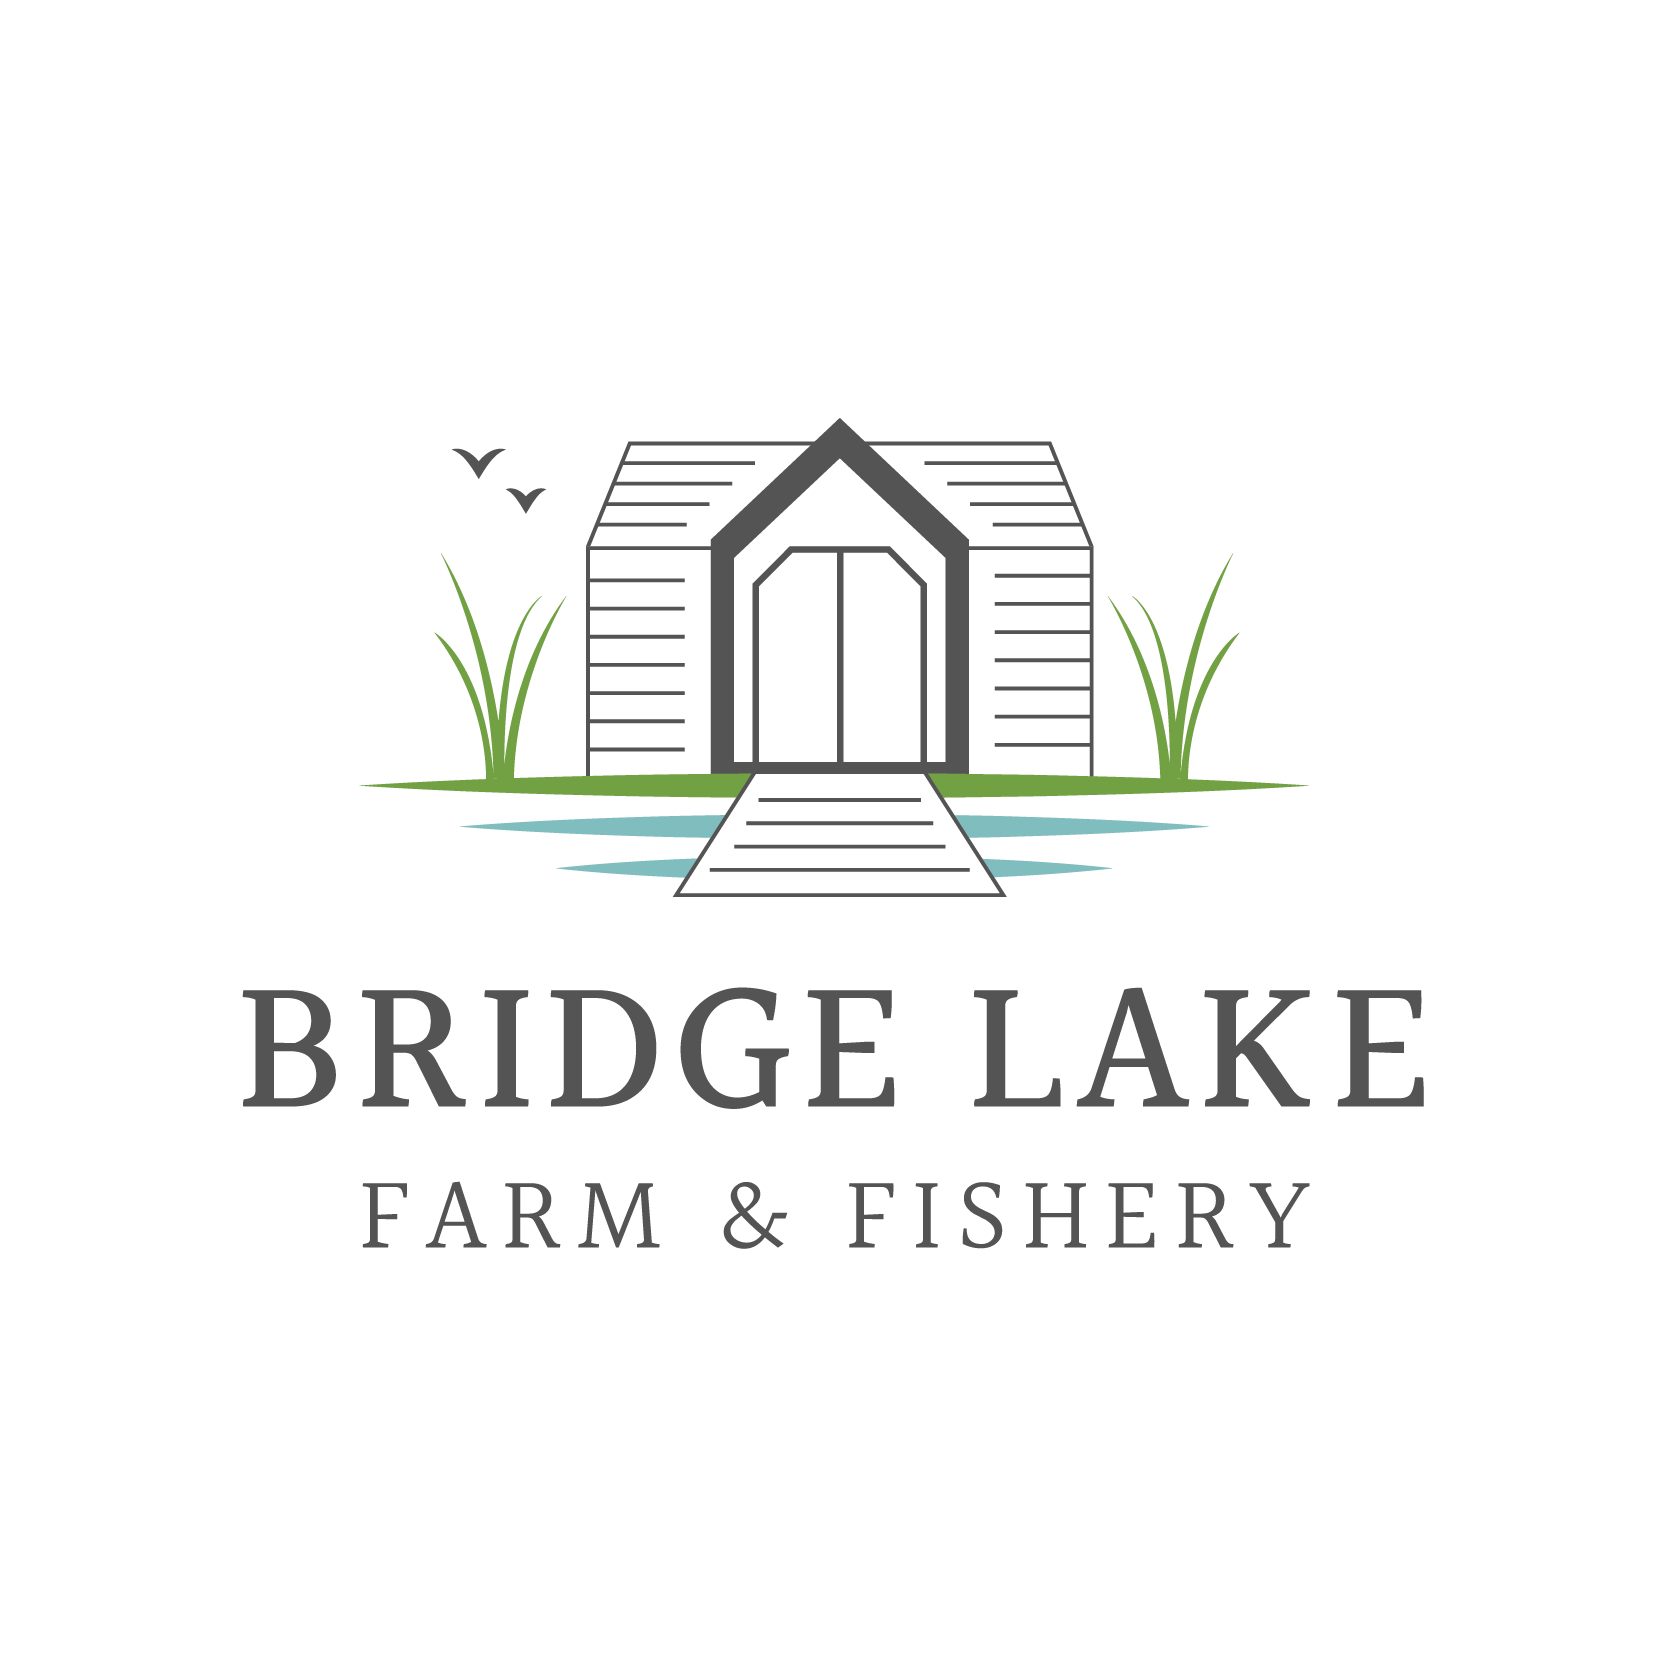 Logo Design for Farm and Fishery Business